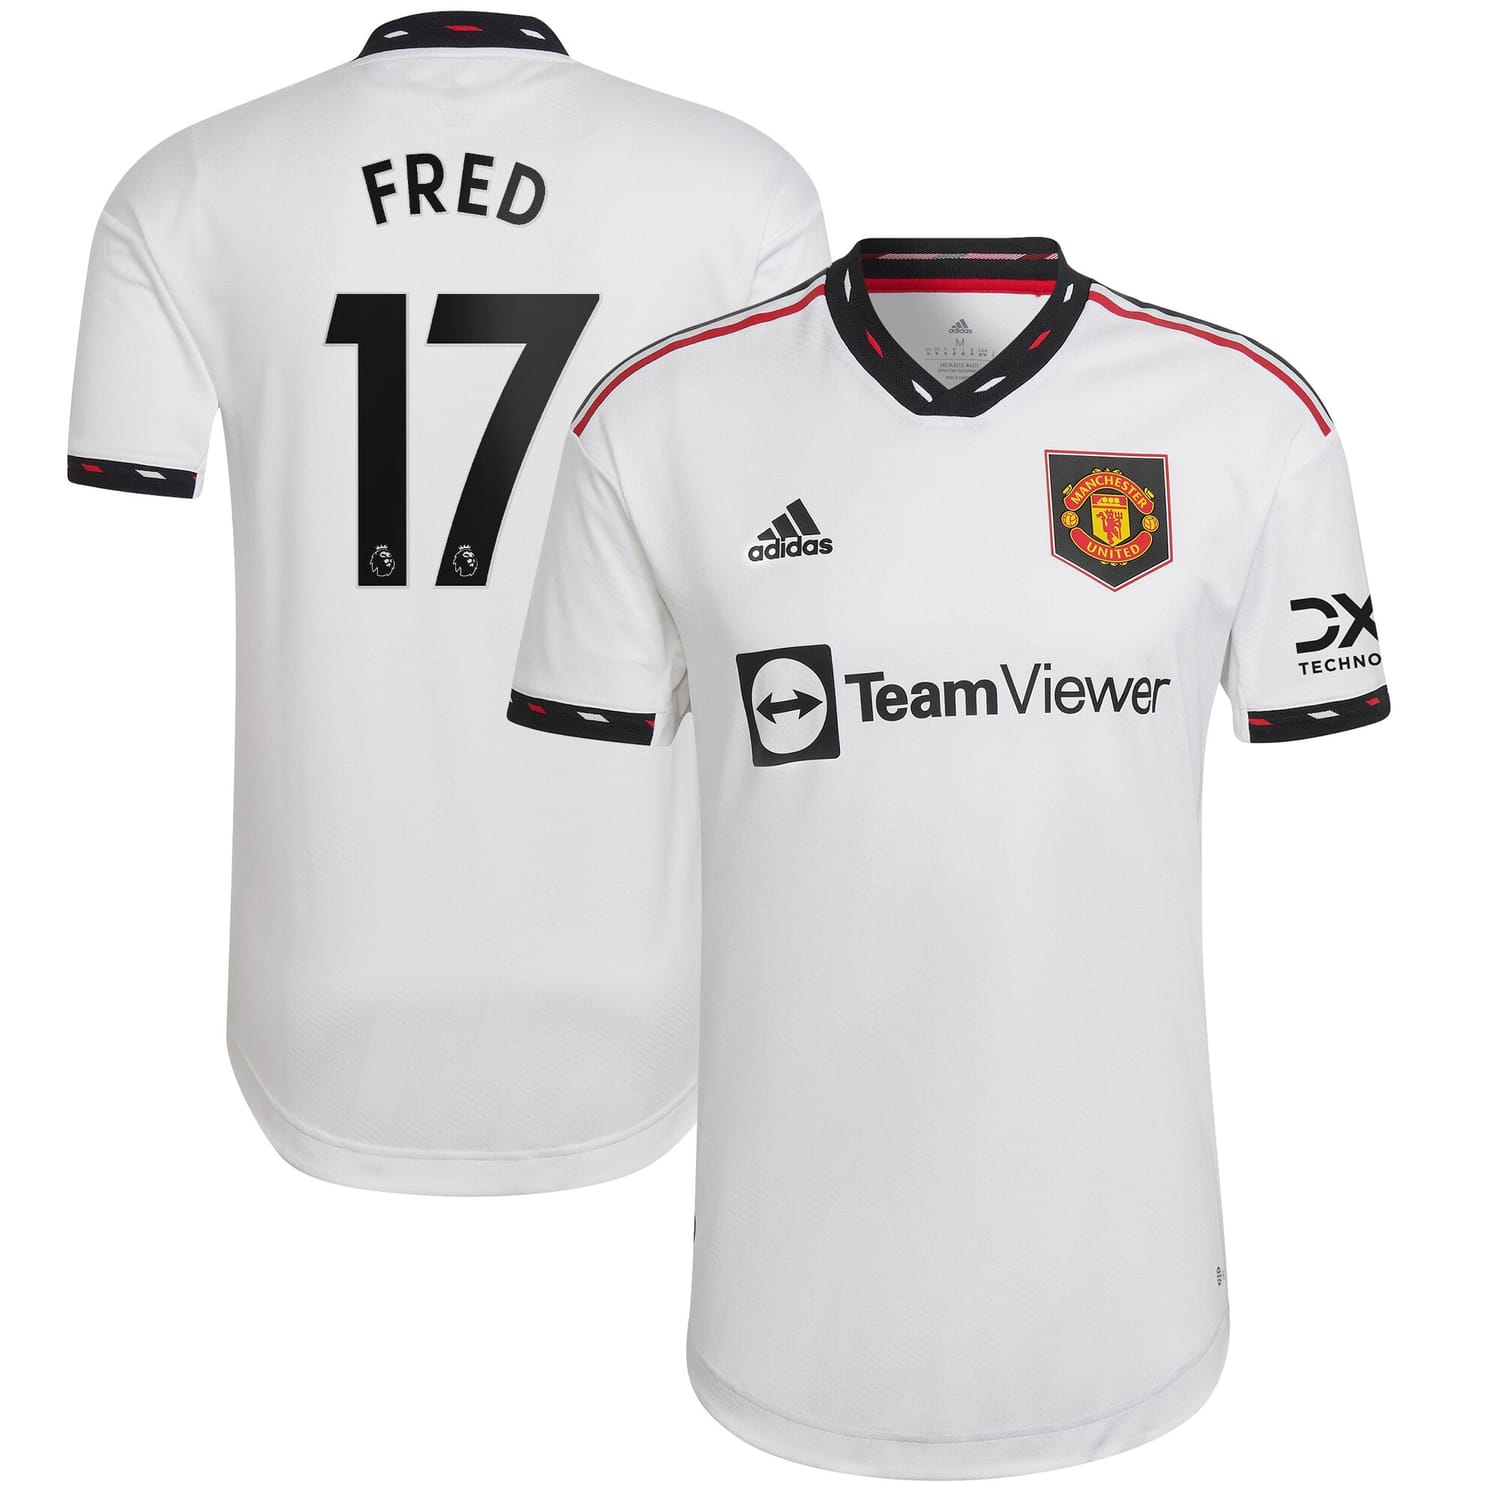 Premier League Manchester United Away Authentic Jersey Shirt 2022-23 player Fred 17 printing for Men